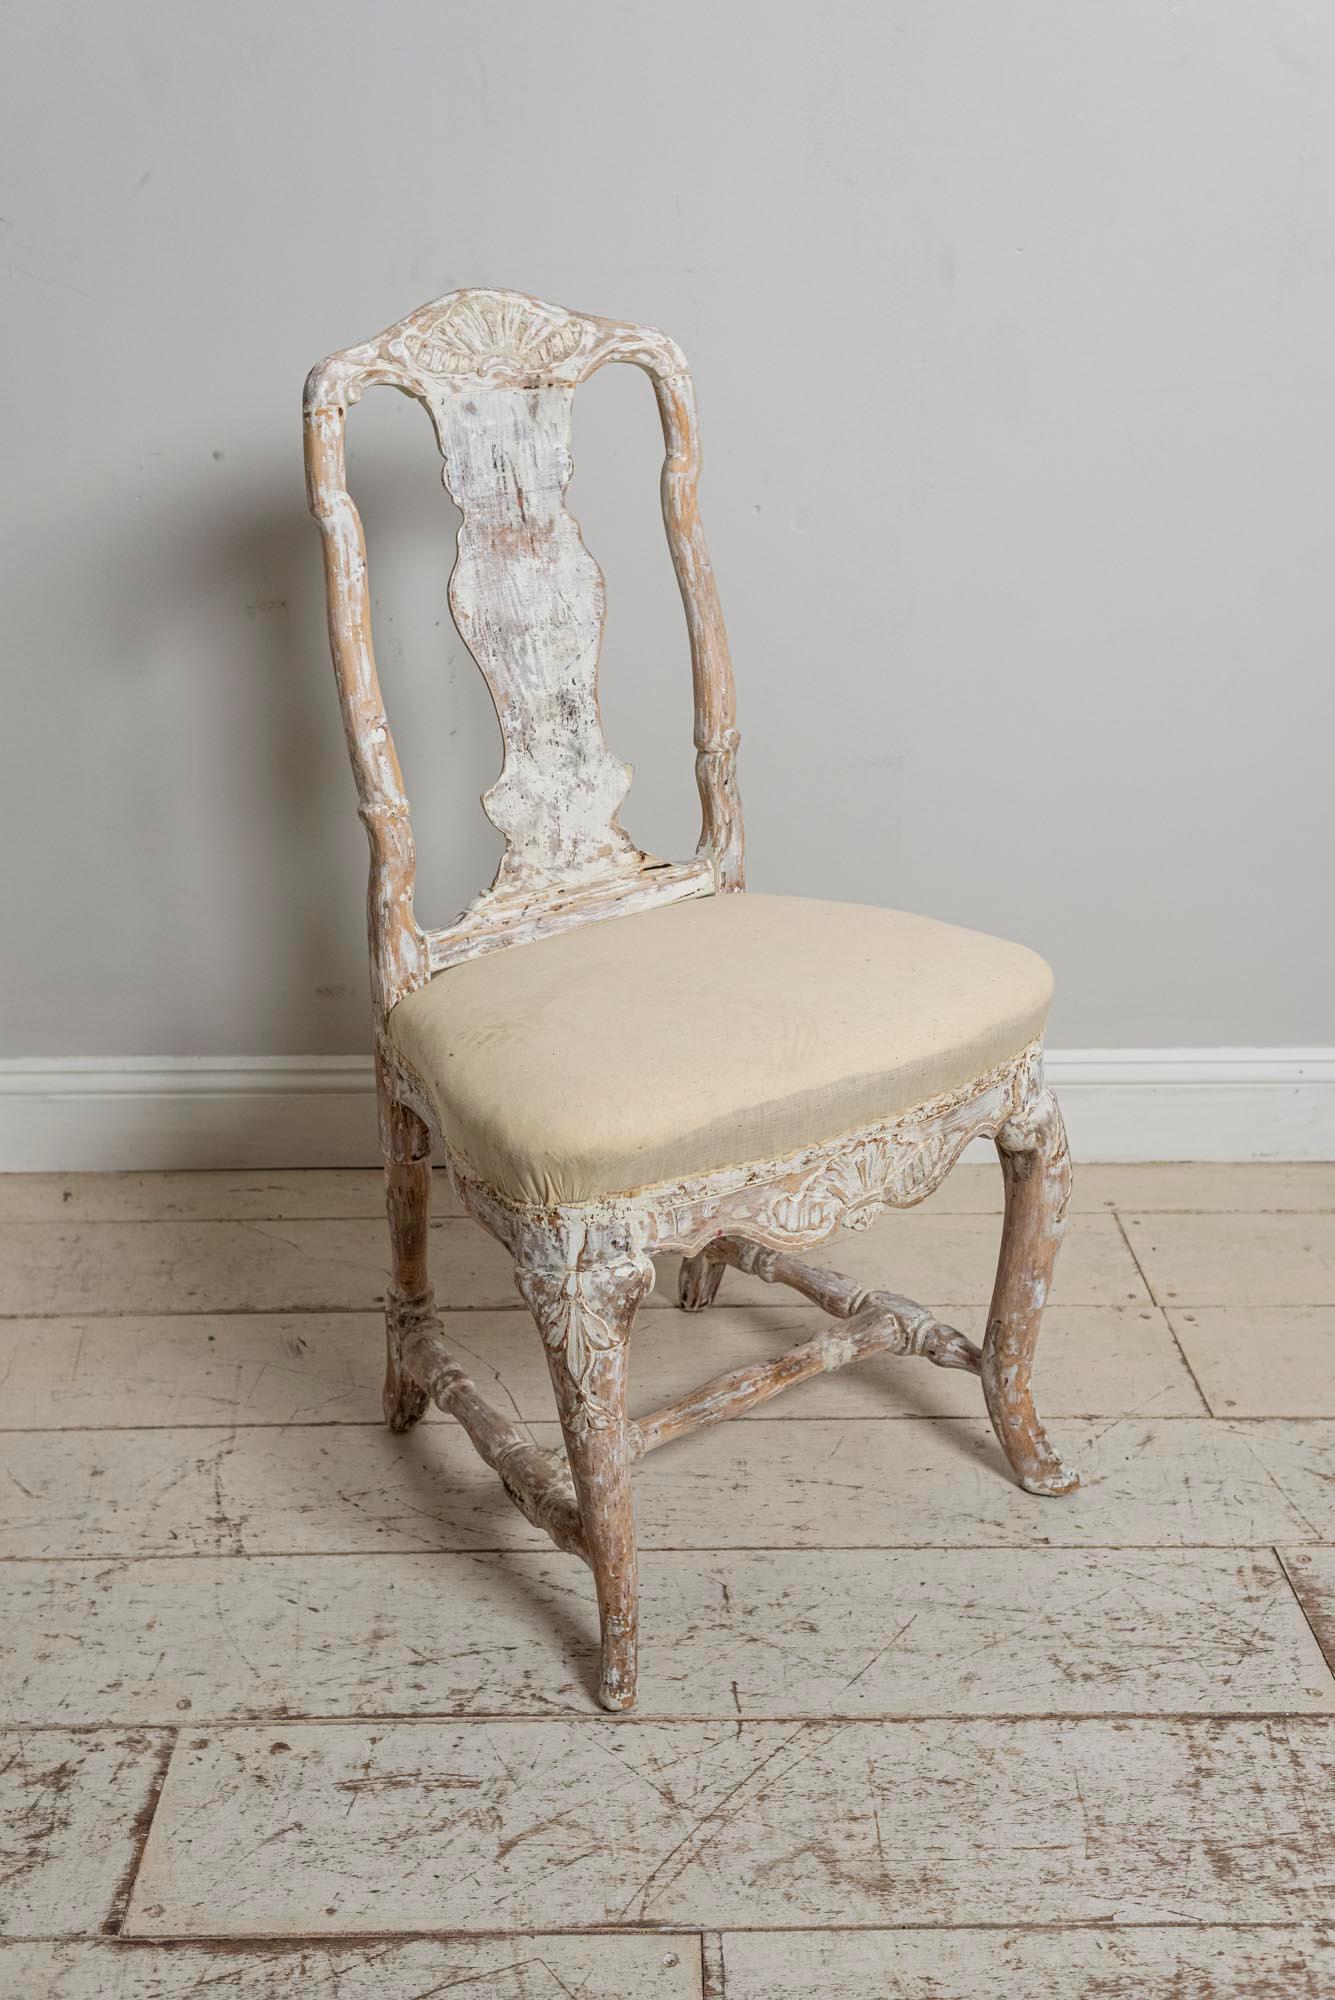 Swedish Rococo Original Painted Carved Shell Detailed Chair, circa 18th Century For Sale 1